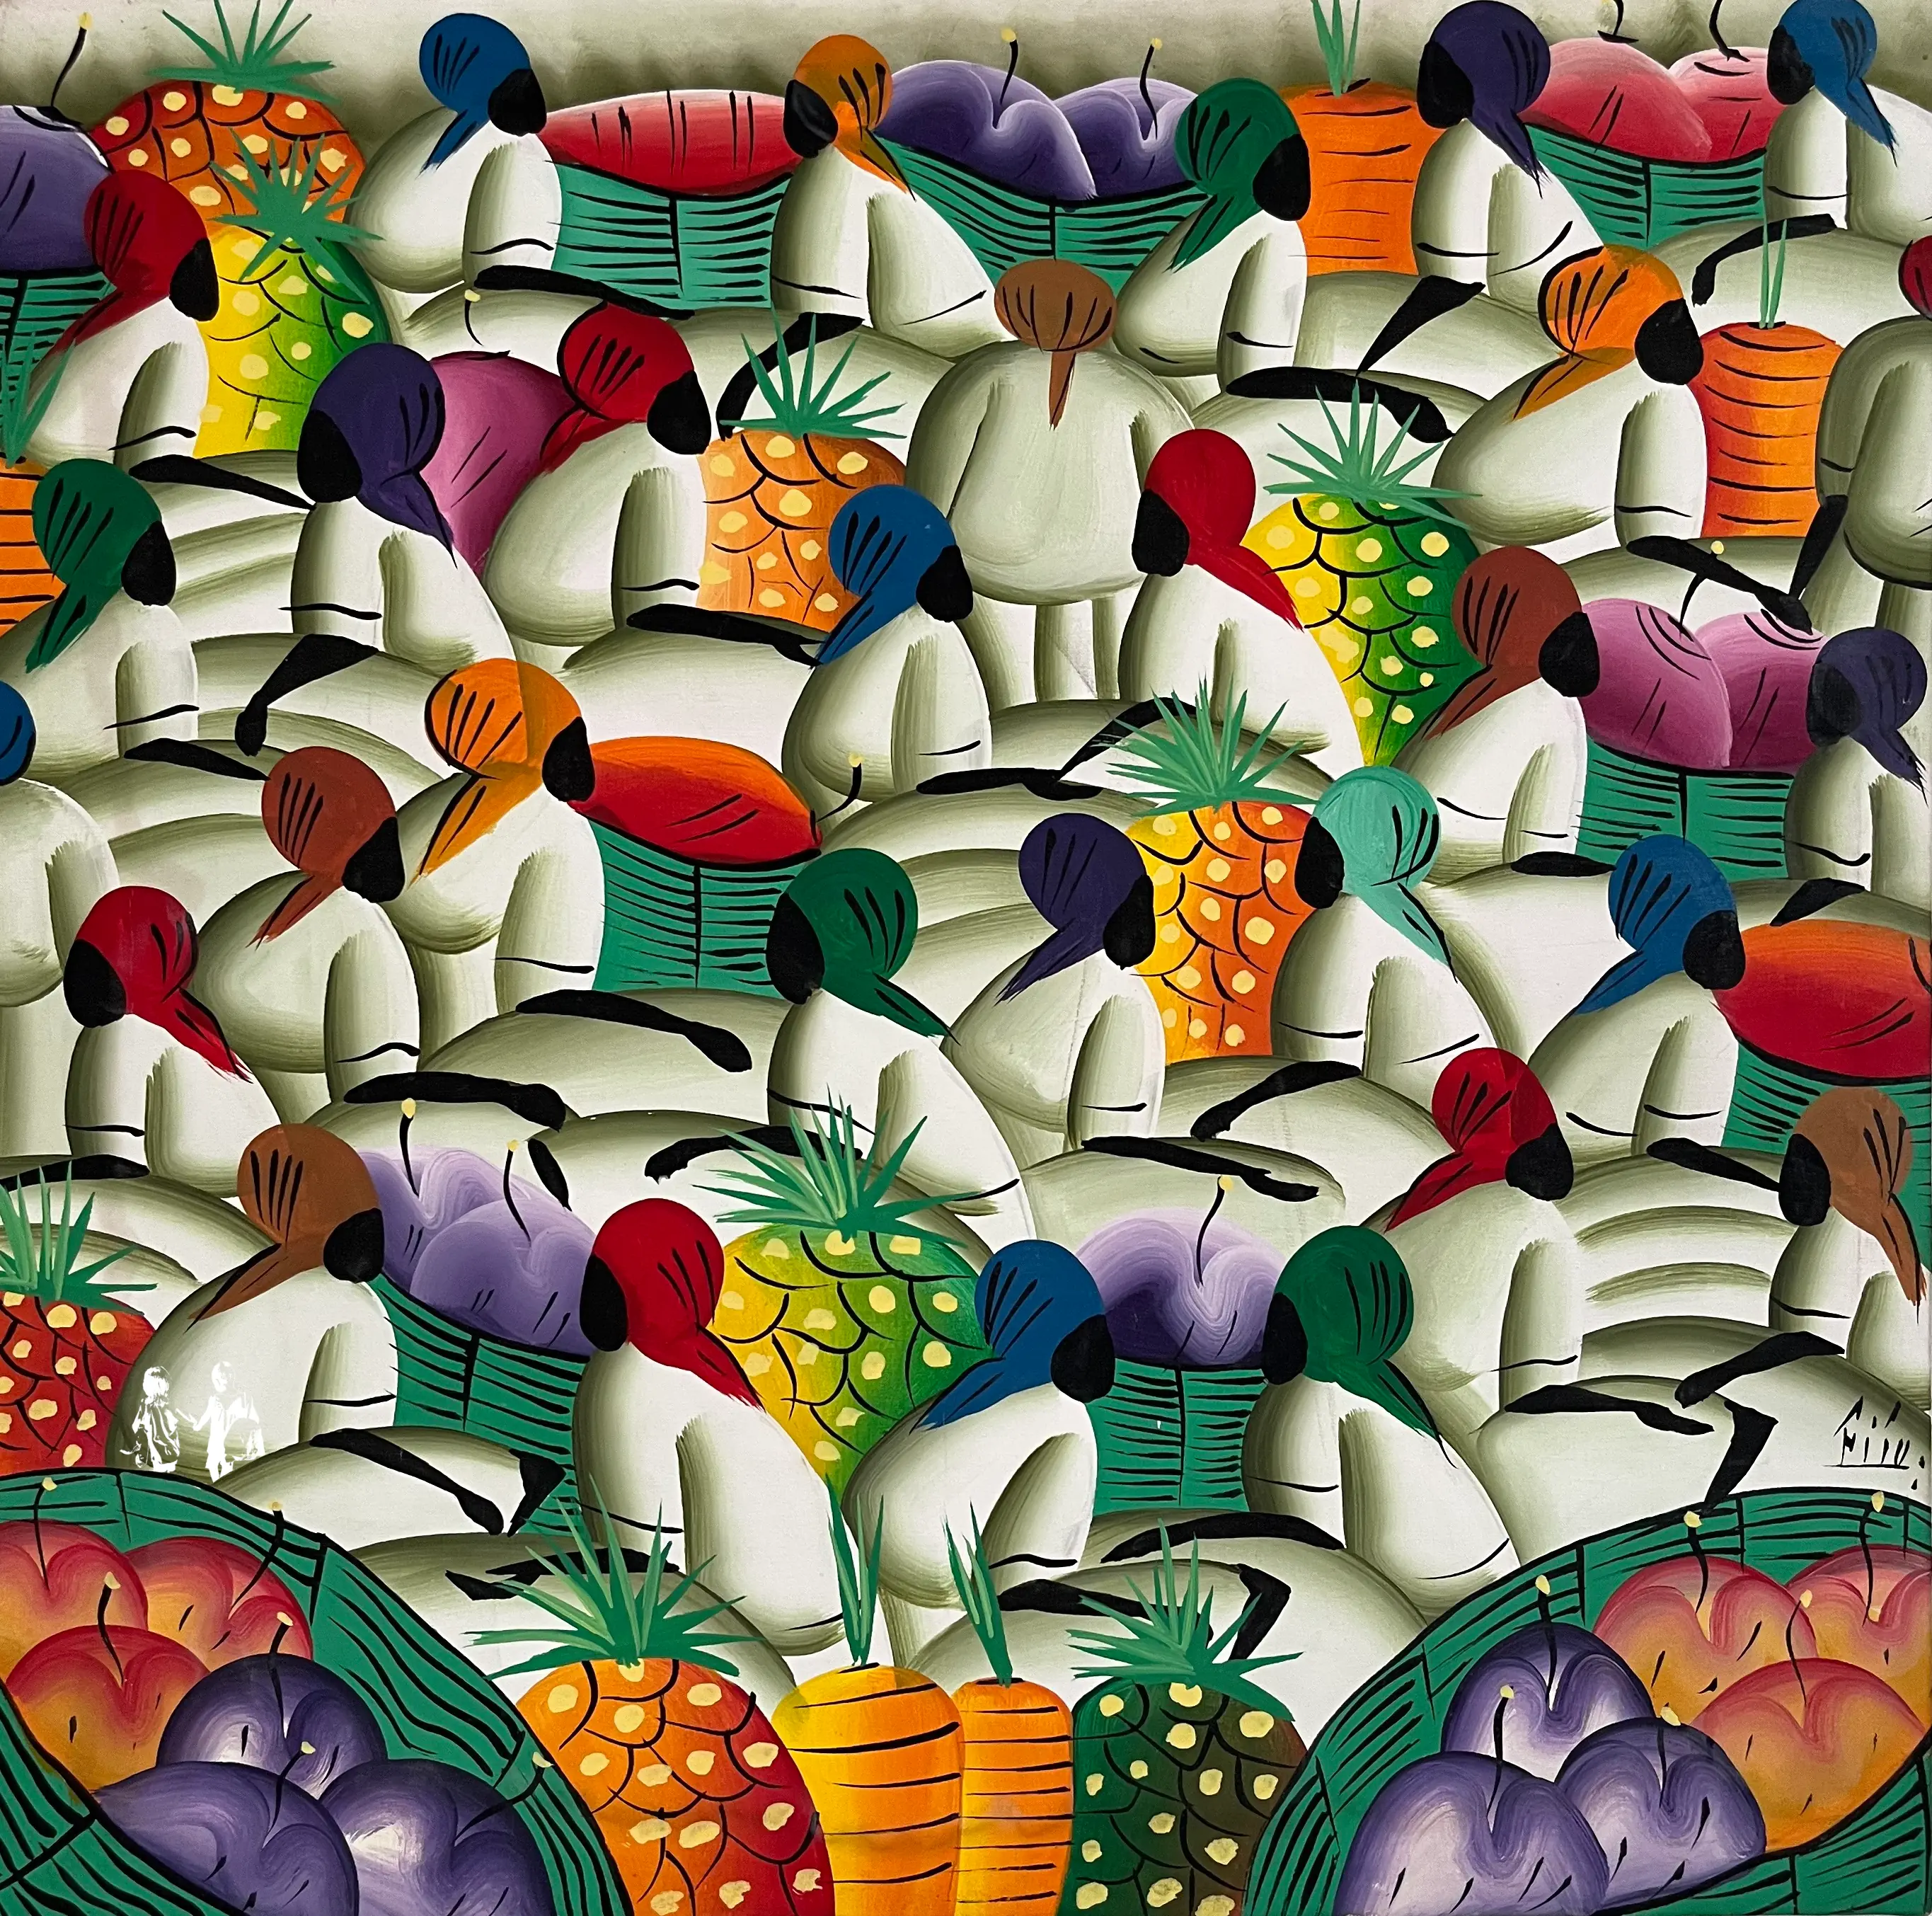 A beautiful, abstract, colourful painting of Cuban people and fruits